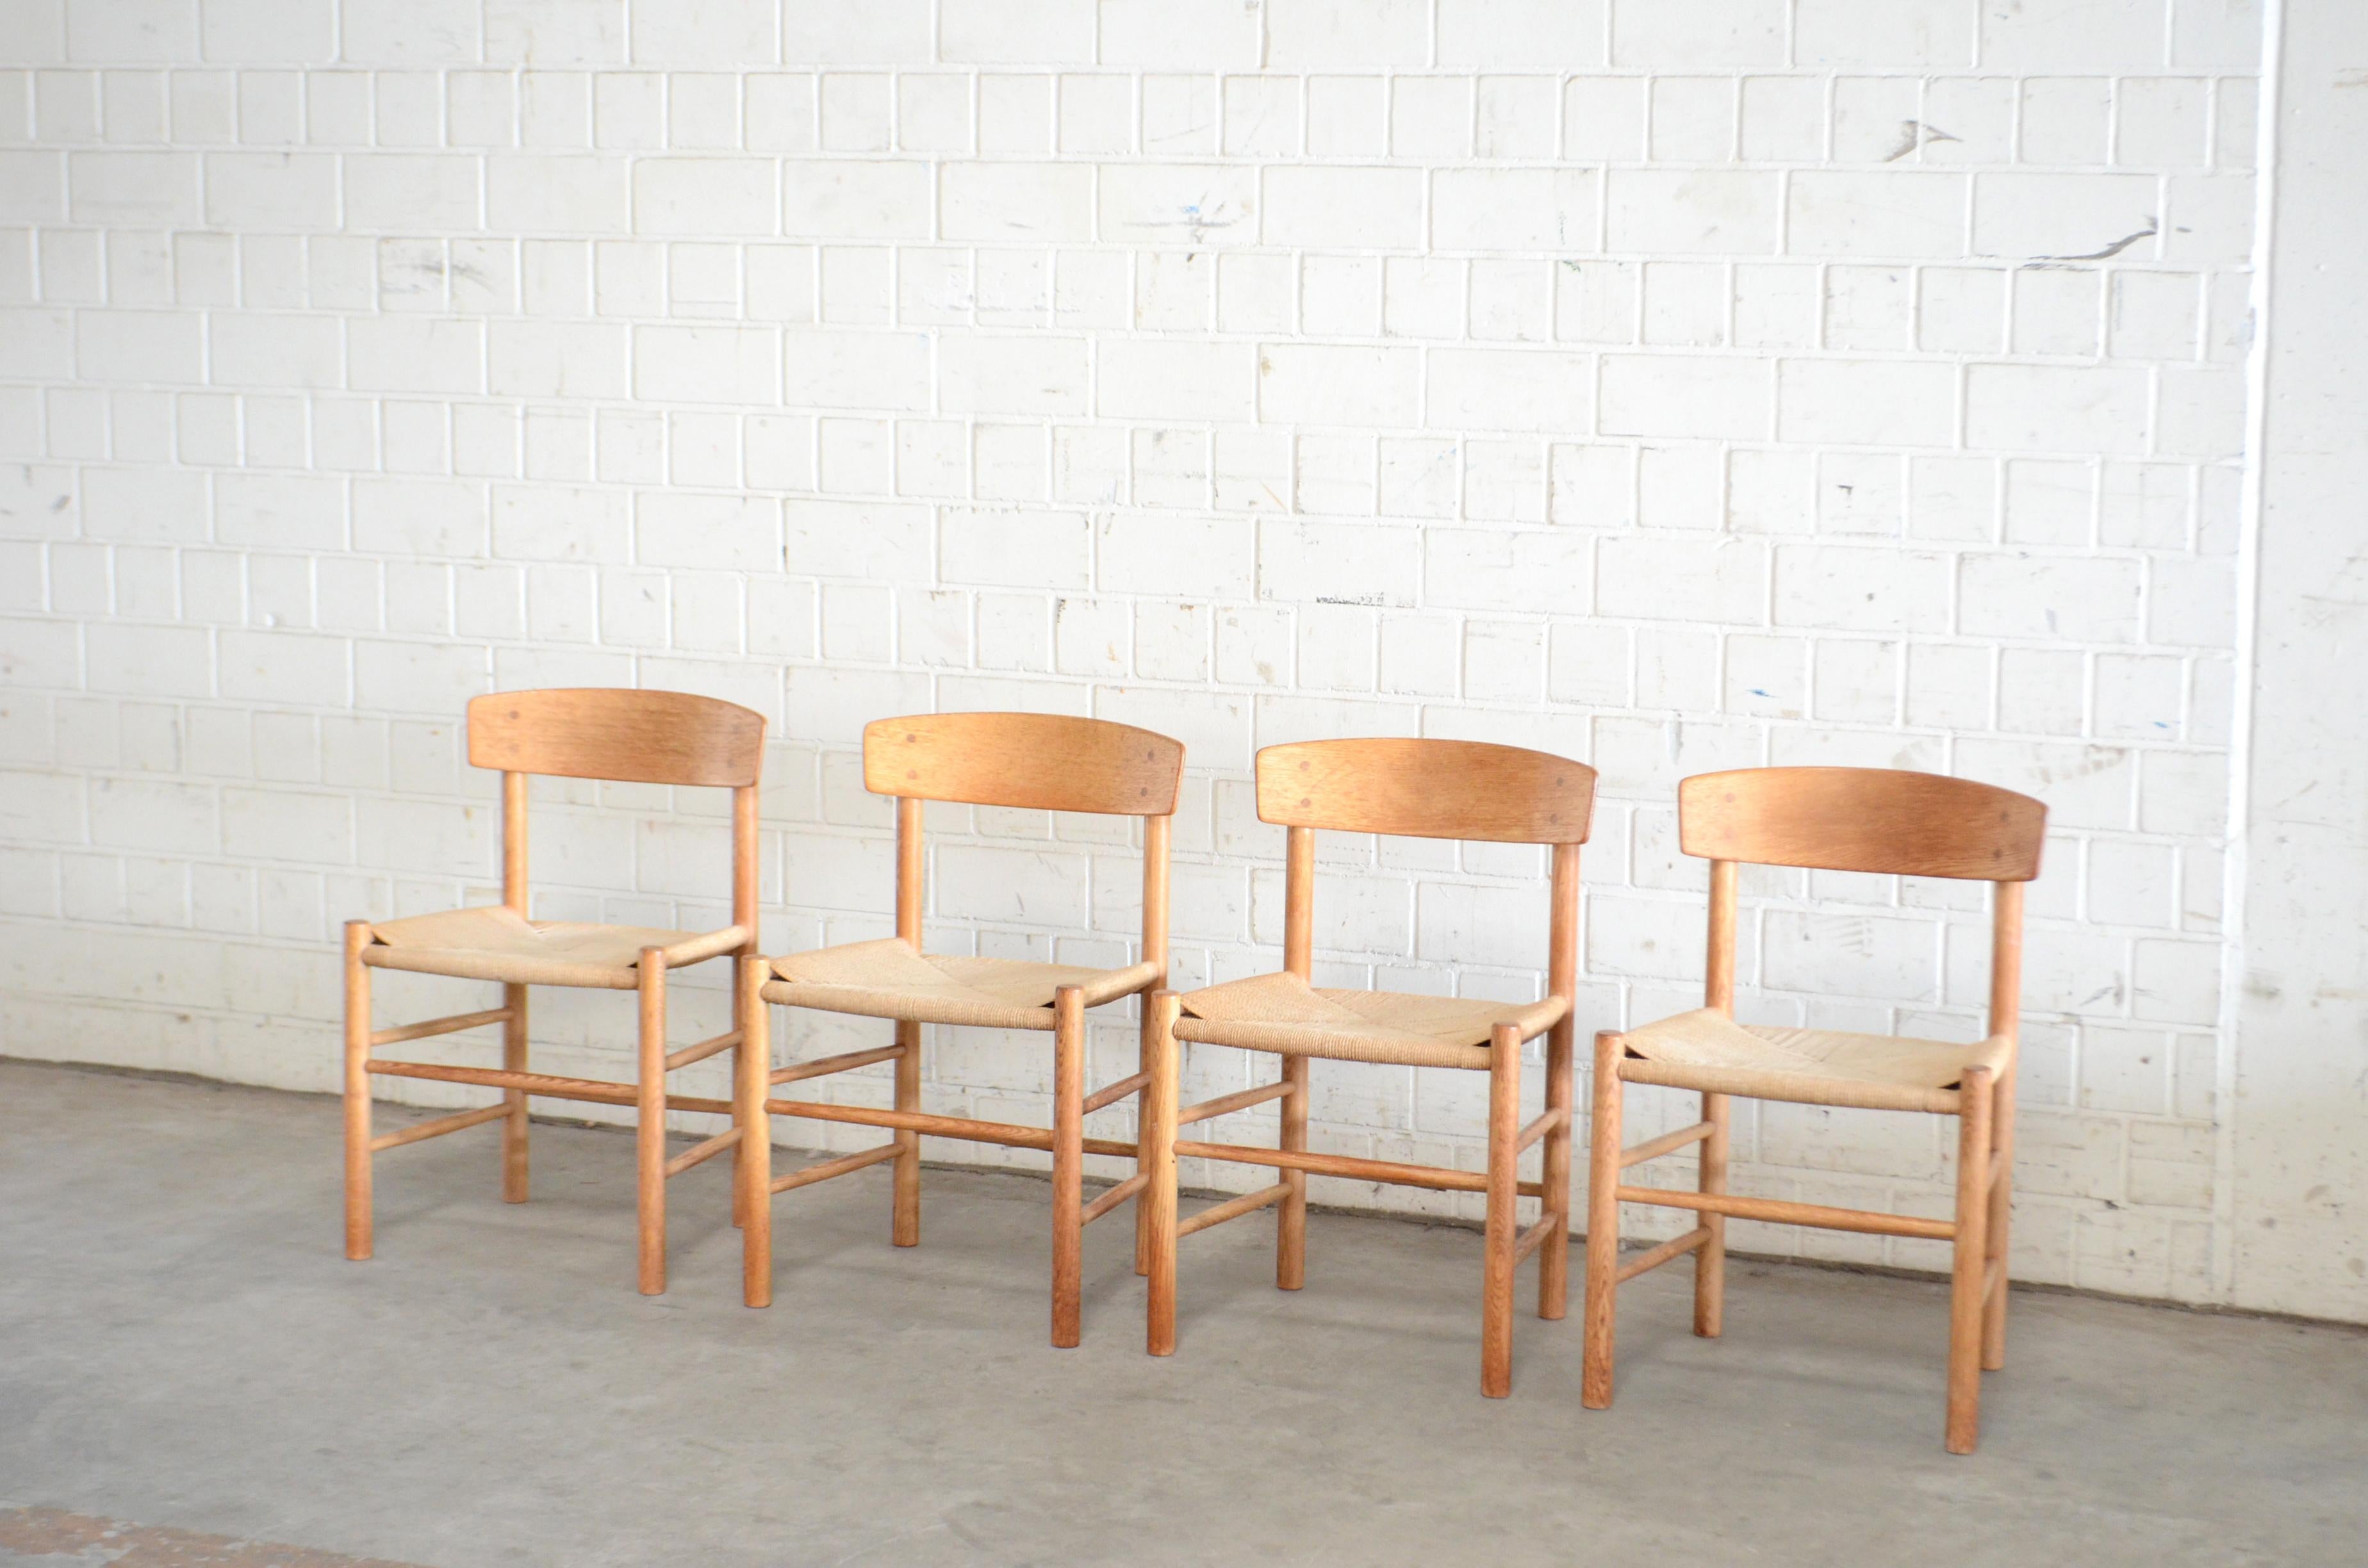 This set of four J39 chairs was designed by Borge Mogensen and produced by FDB Mobler since 1947.
These chairs are old and the first production from FDB Mobler. The design was inspired by the American Shaker furniture.
It´s made of lacquered oak